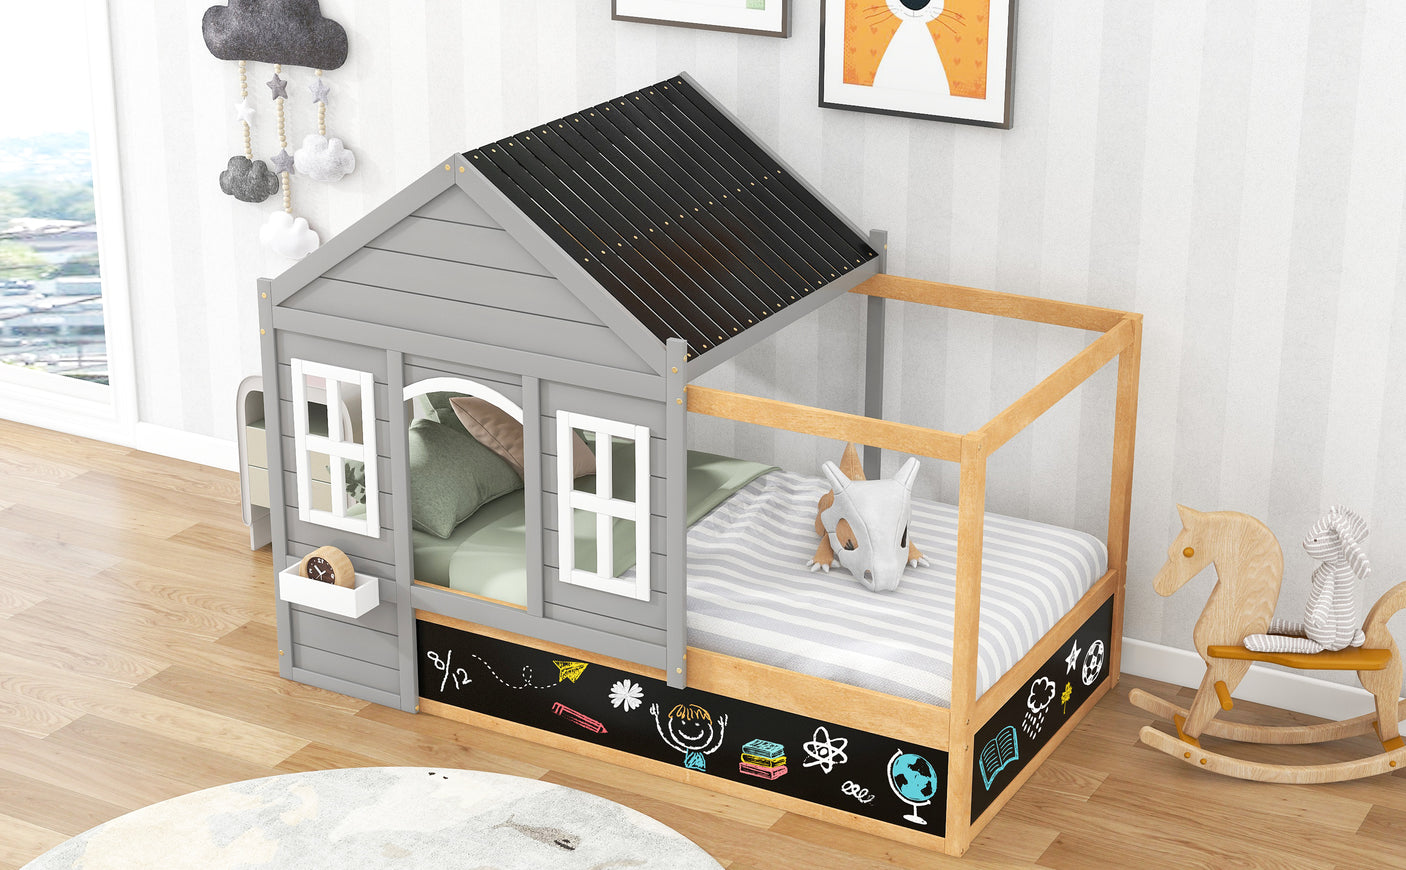 Twin Size House Shaped Canopy Bed with Black Roof and White Window,Blackboard and Little Shelf,Gray - Home Elegance USA